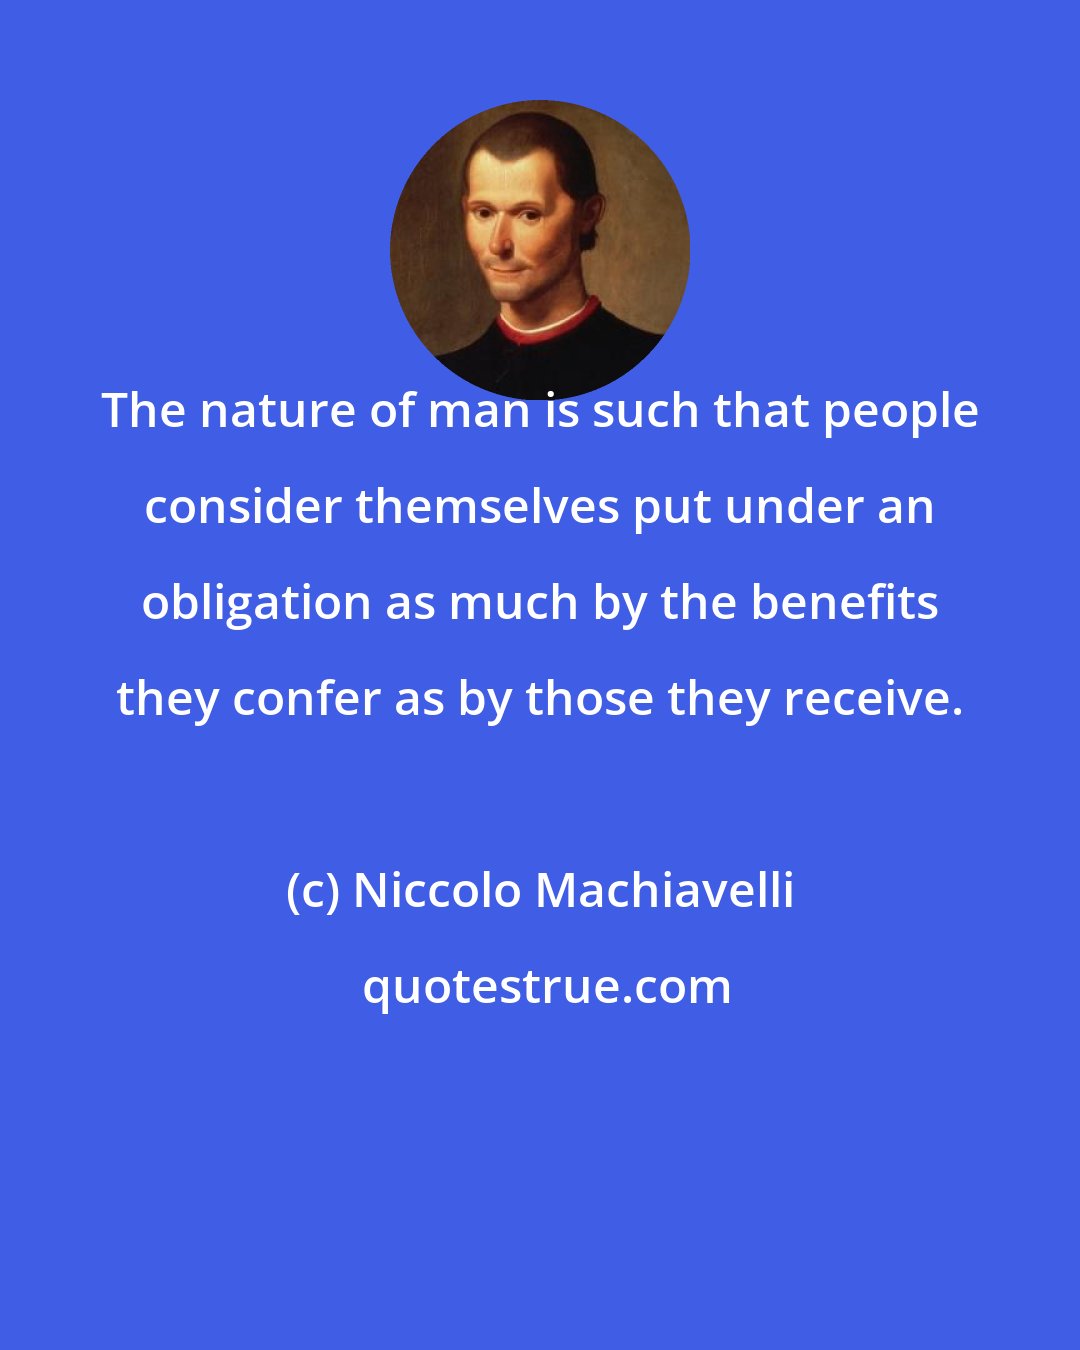 Niccolo Machiavelli: The nature of man is such that people consider themselves put under an obligation as much by the benefits they confer as by those they receive.